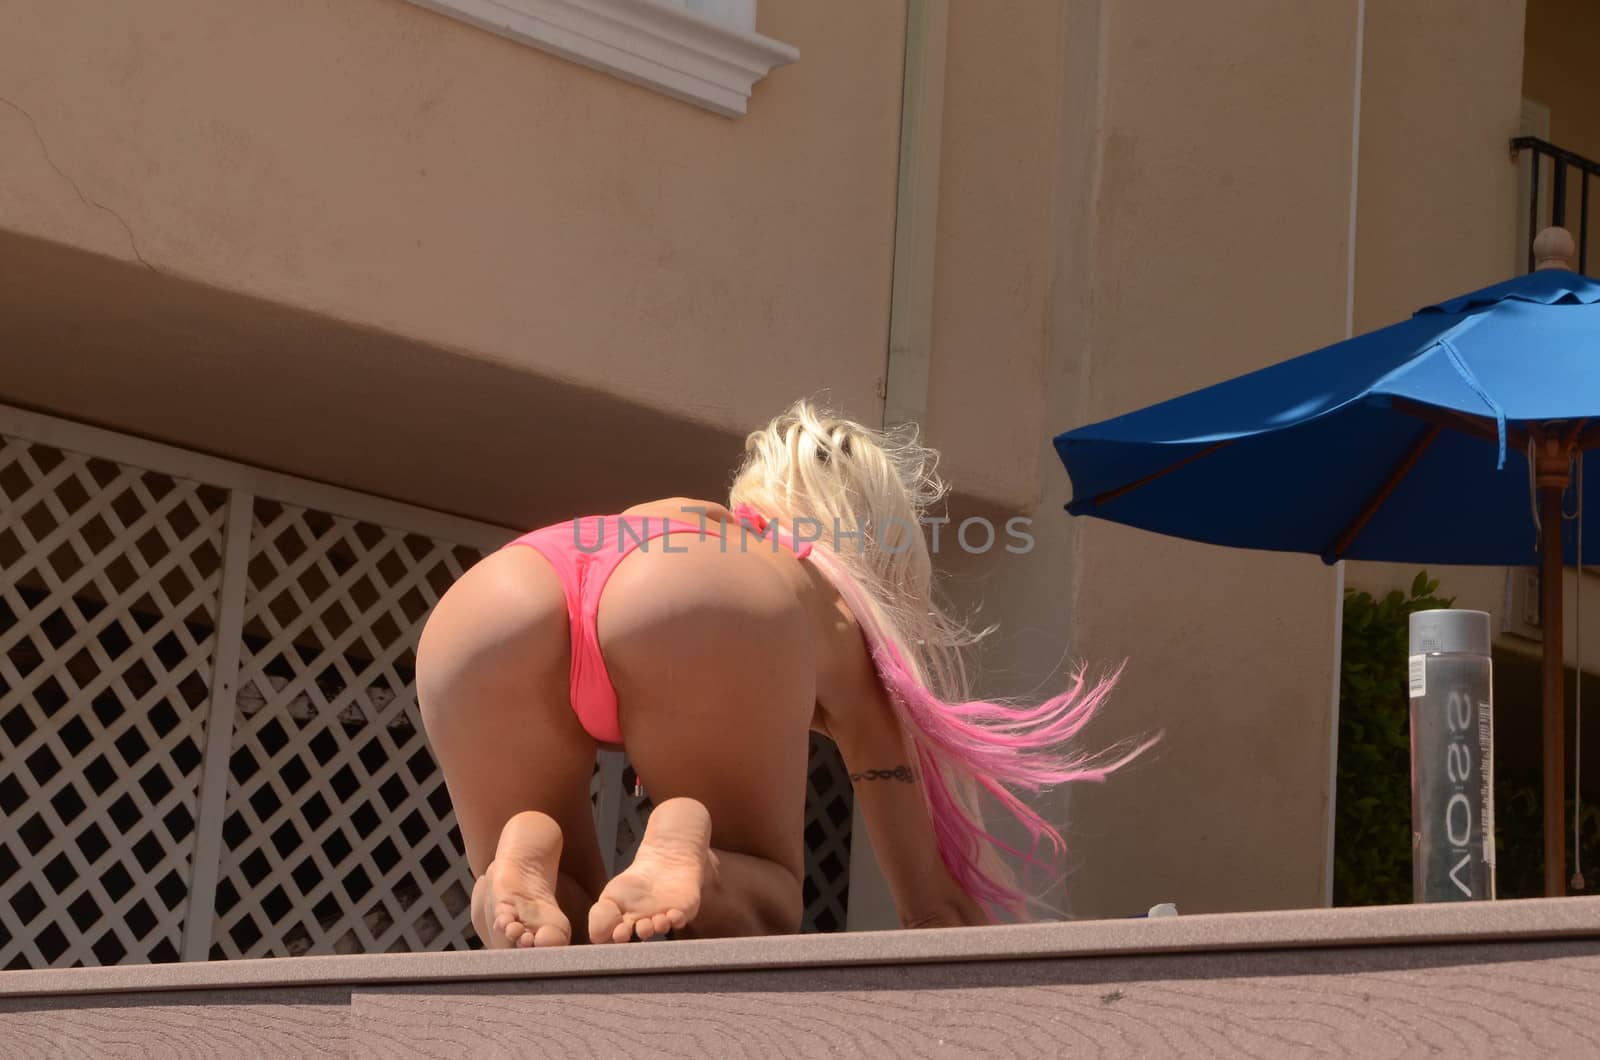 Frenchy Morgan the "Celebrity Big Brother" Star is spotted in a tiny pink bikini tanning, texting and taking selfies, Malibu, CA 05-09-17/ImageCollect by ImageCollect